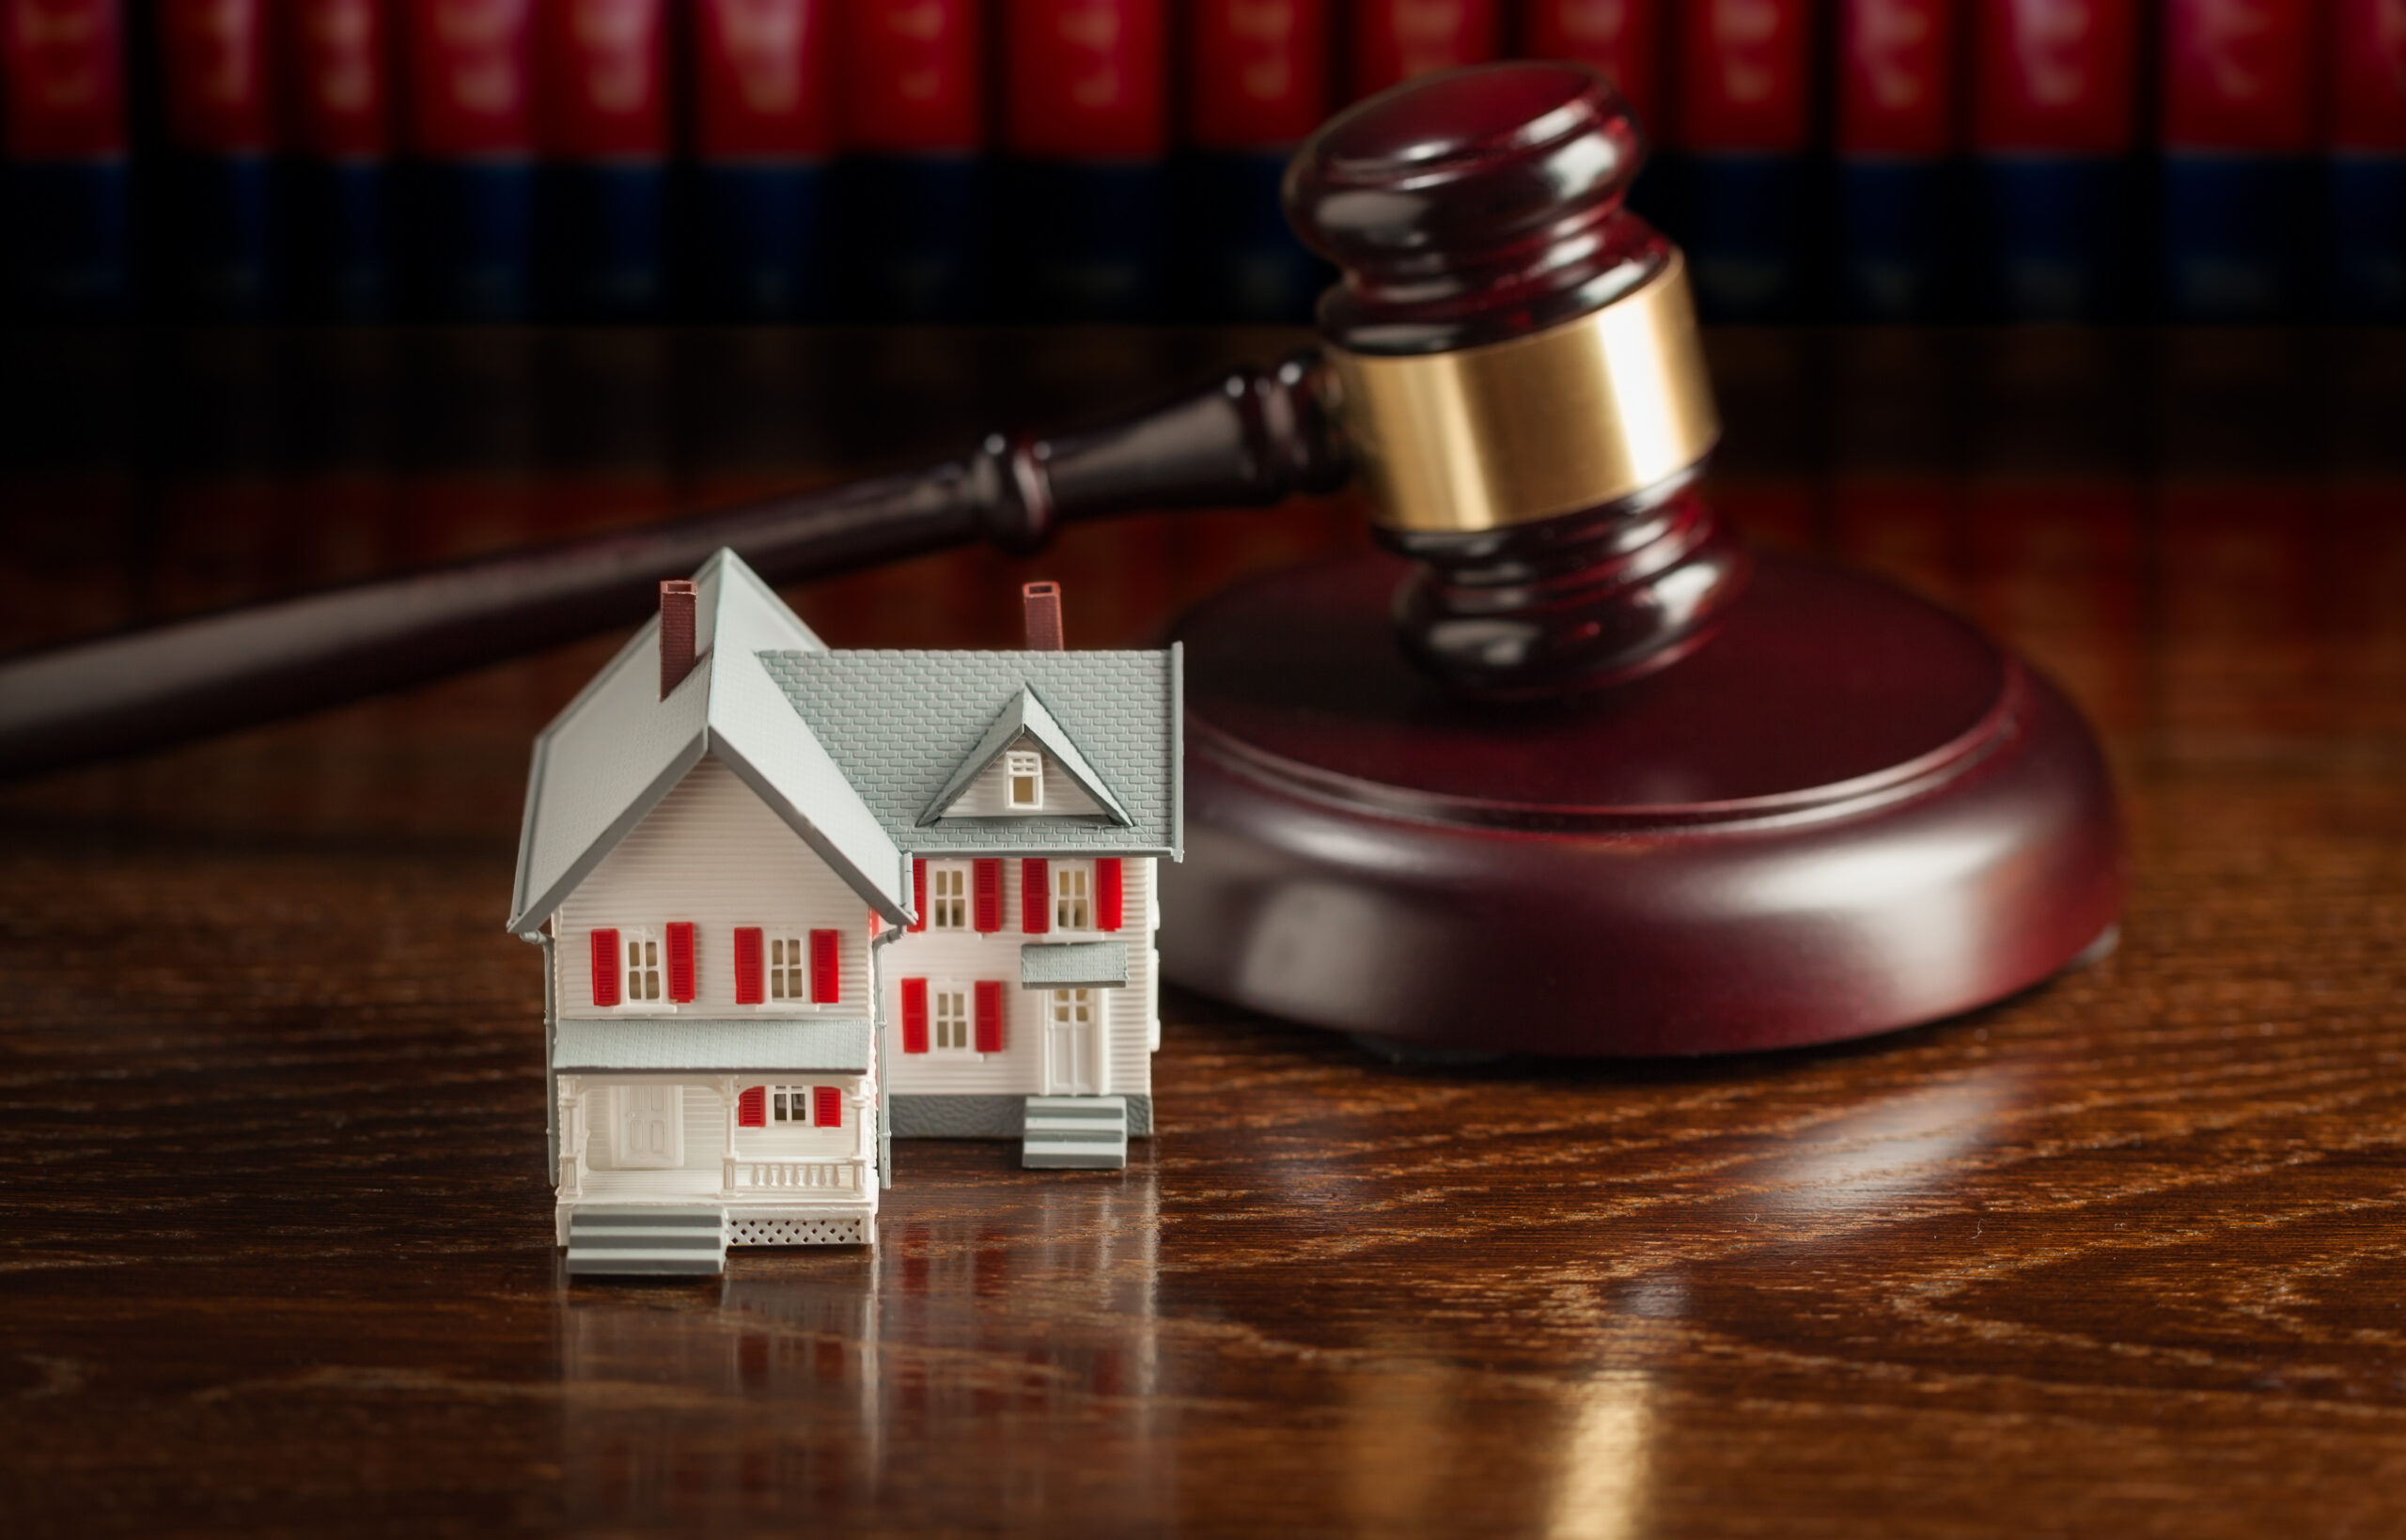 Photo Of a Gavel and Small Model House on Wooden Table